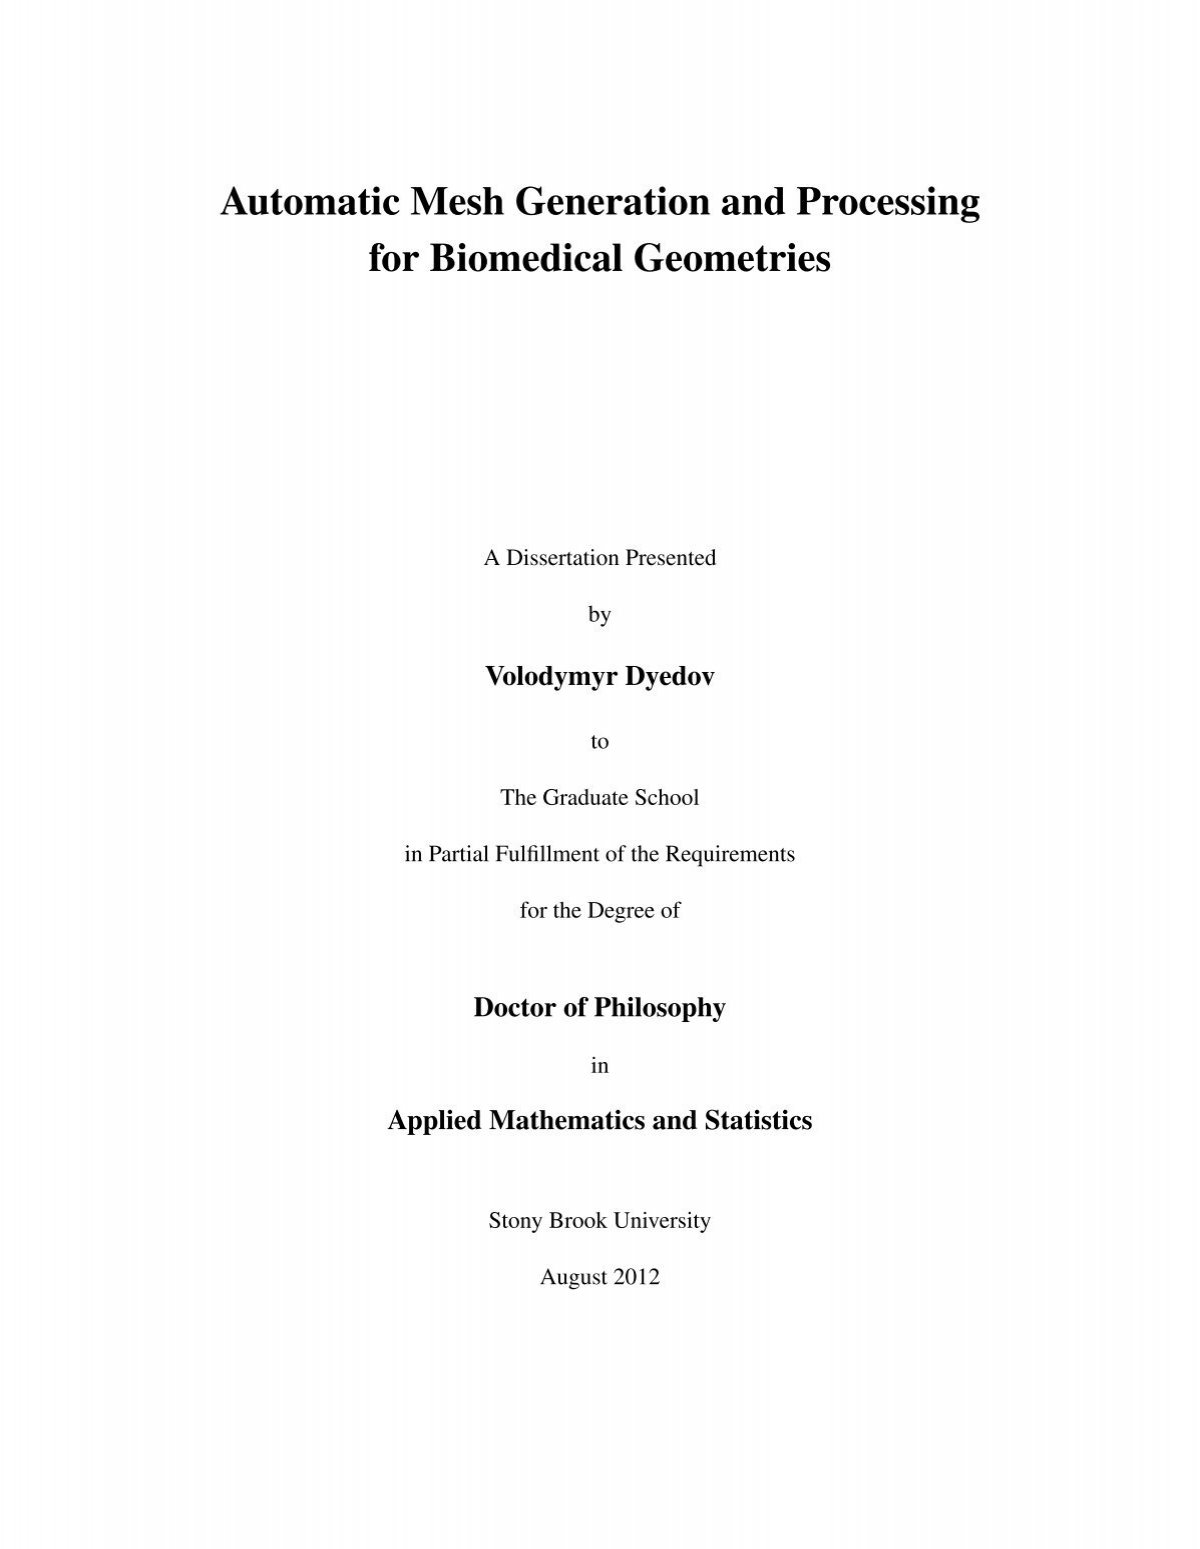 thesis title for mathematics major